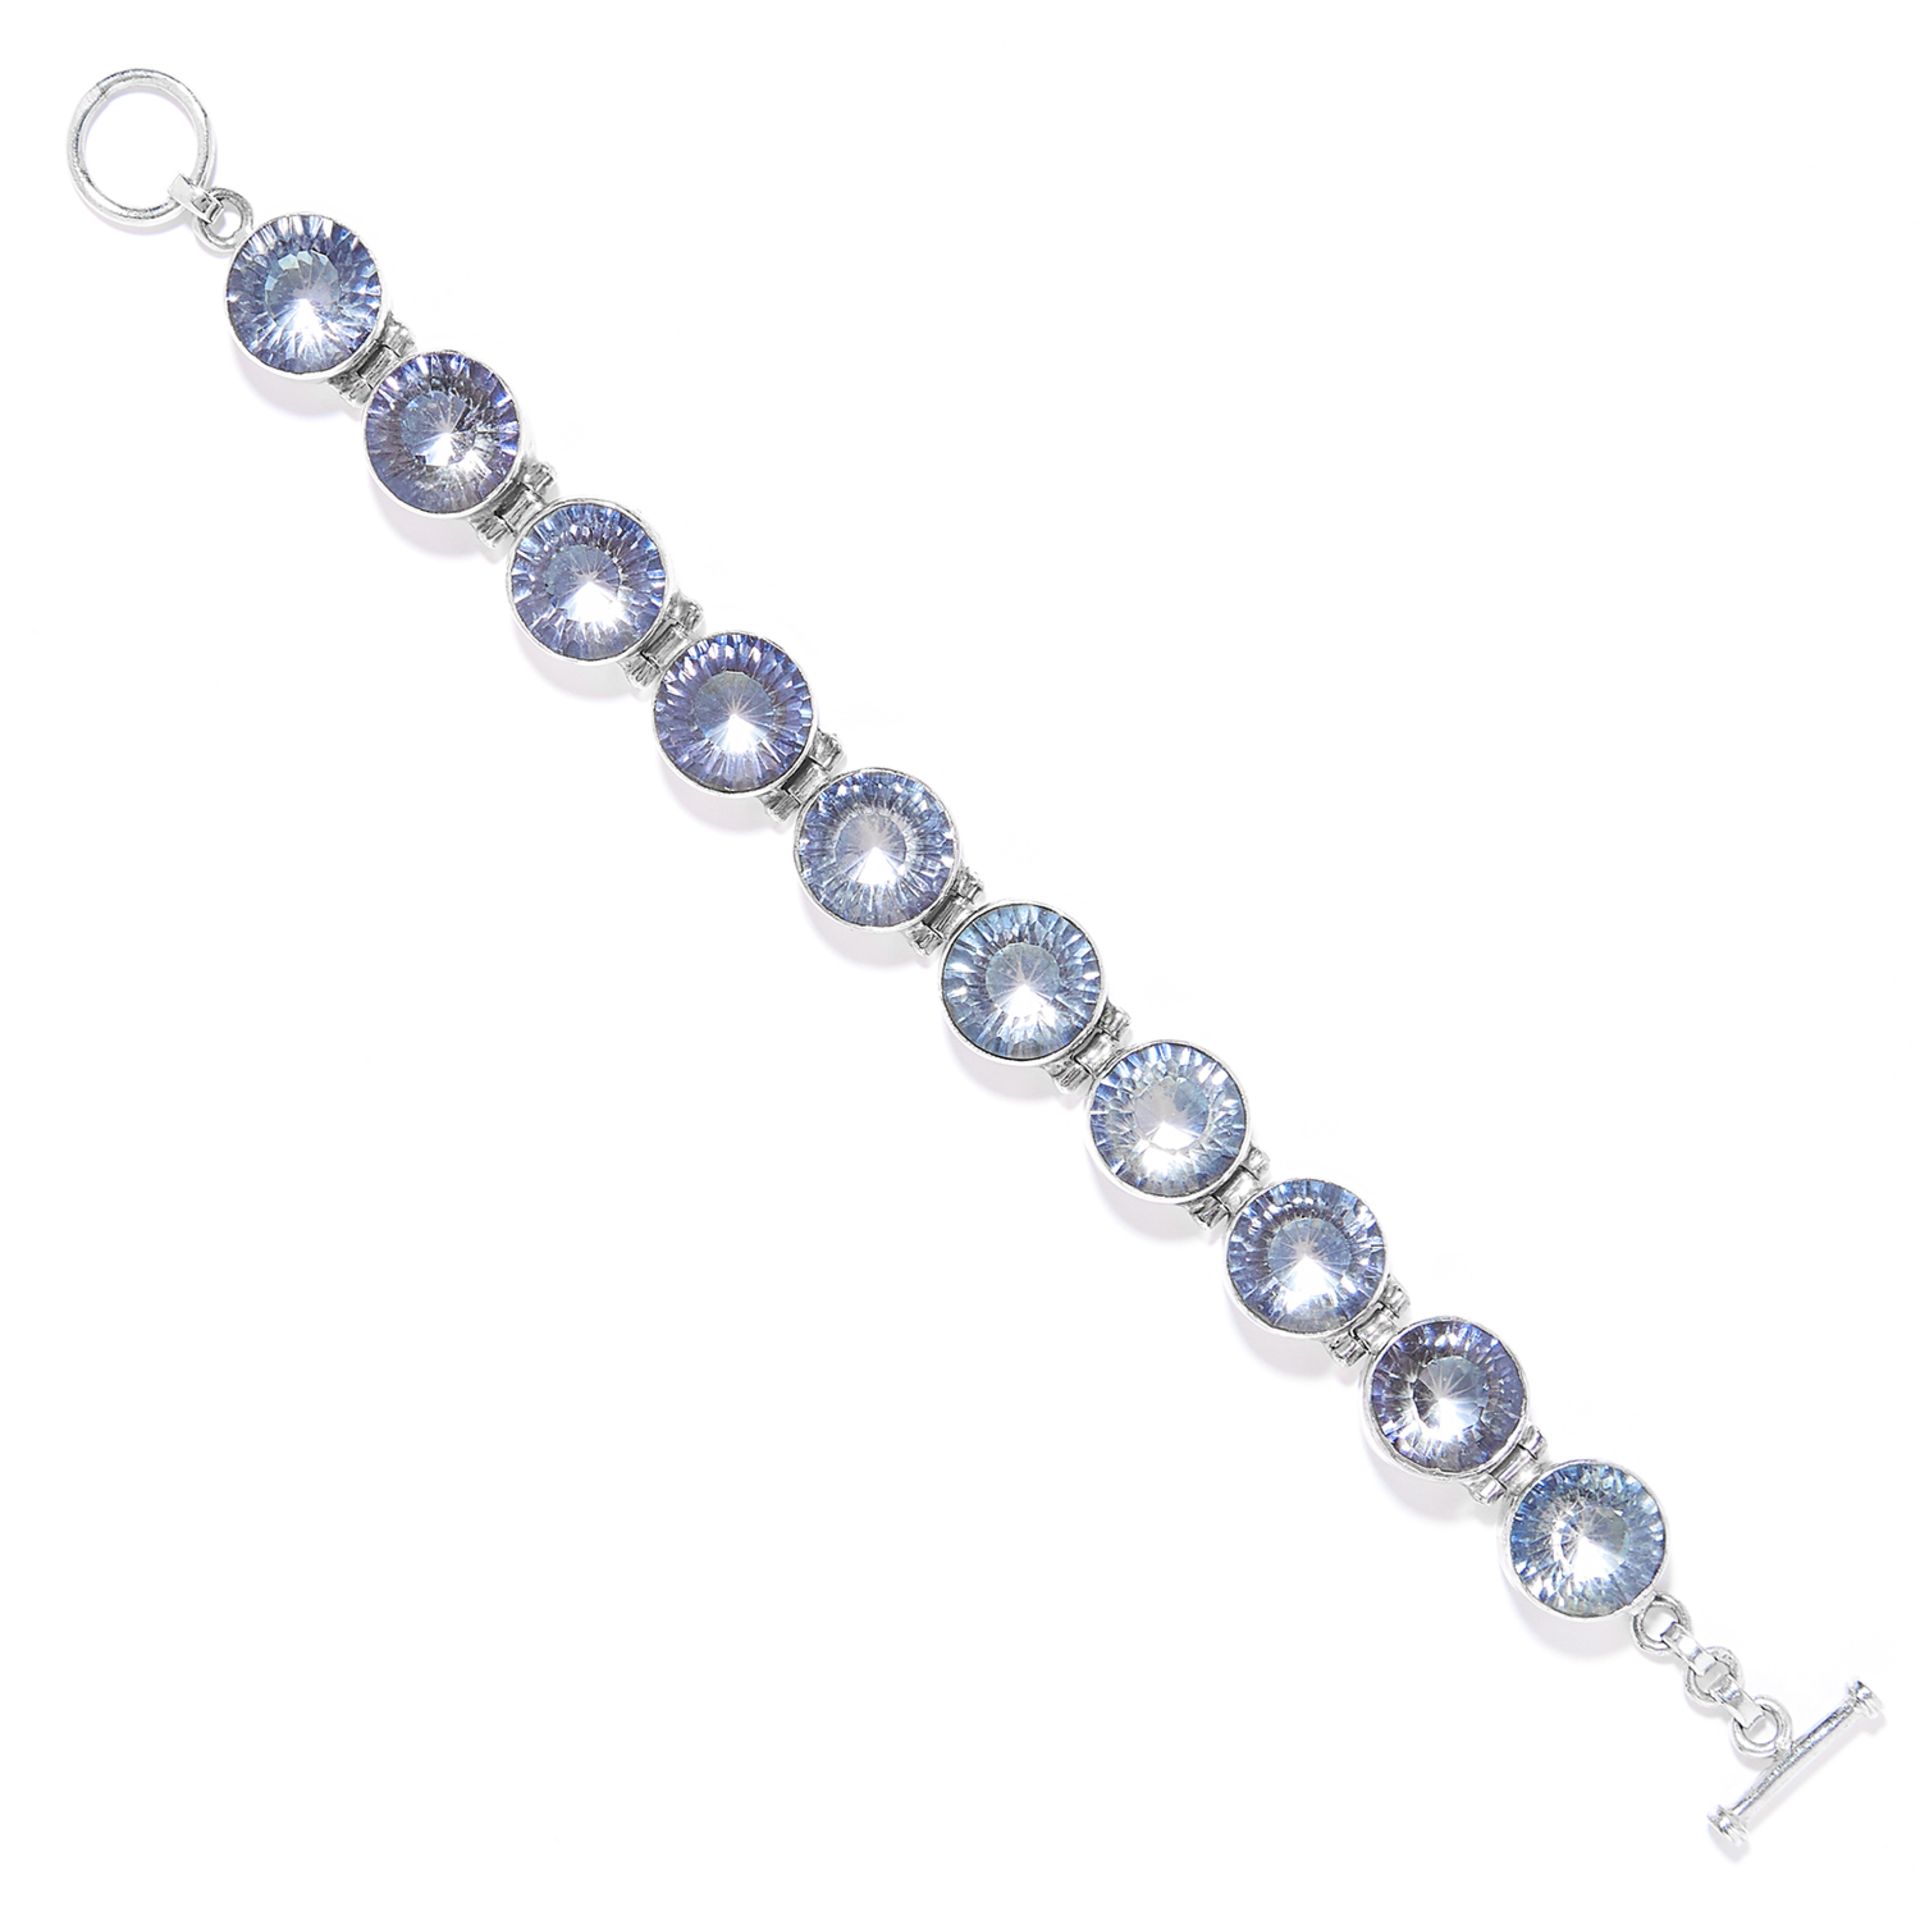 TOPAZ BRACELET AND EARRING SUITE in sterling silver, set with grey/blue faceted topaz, stamped